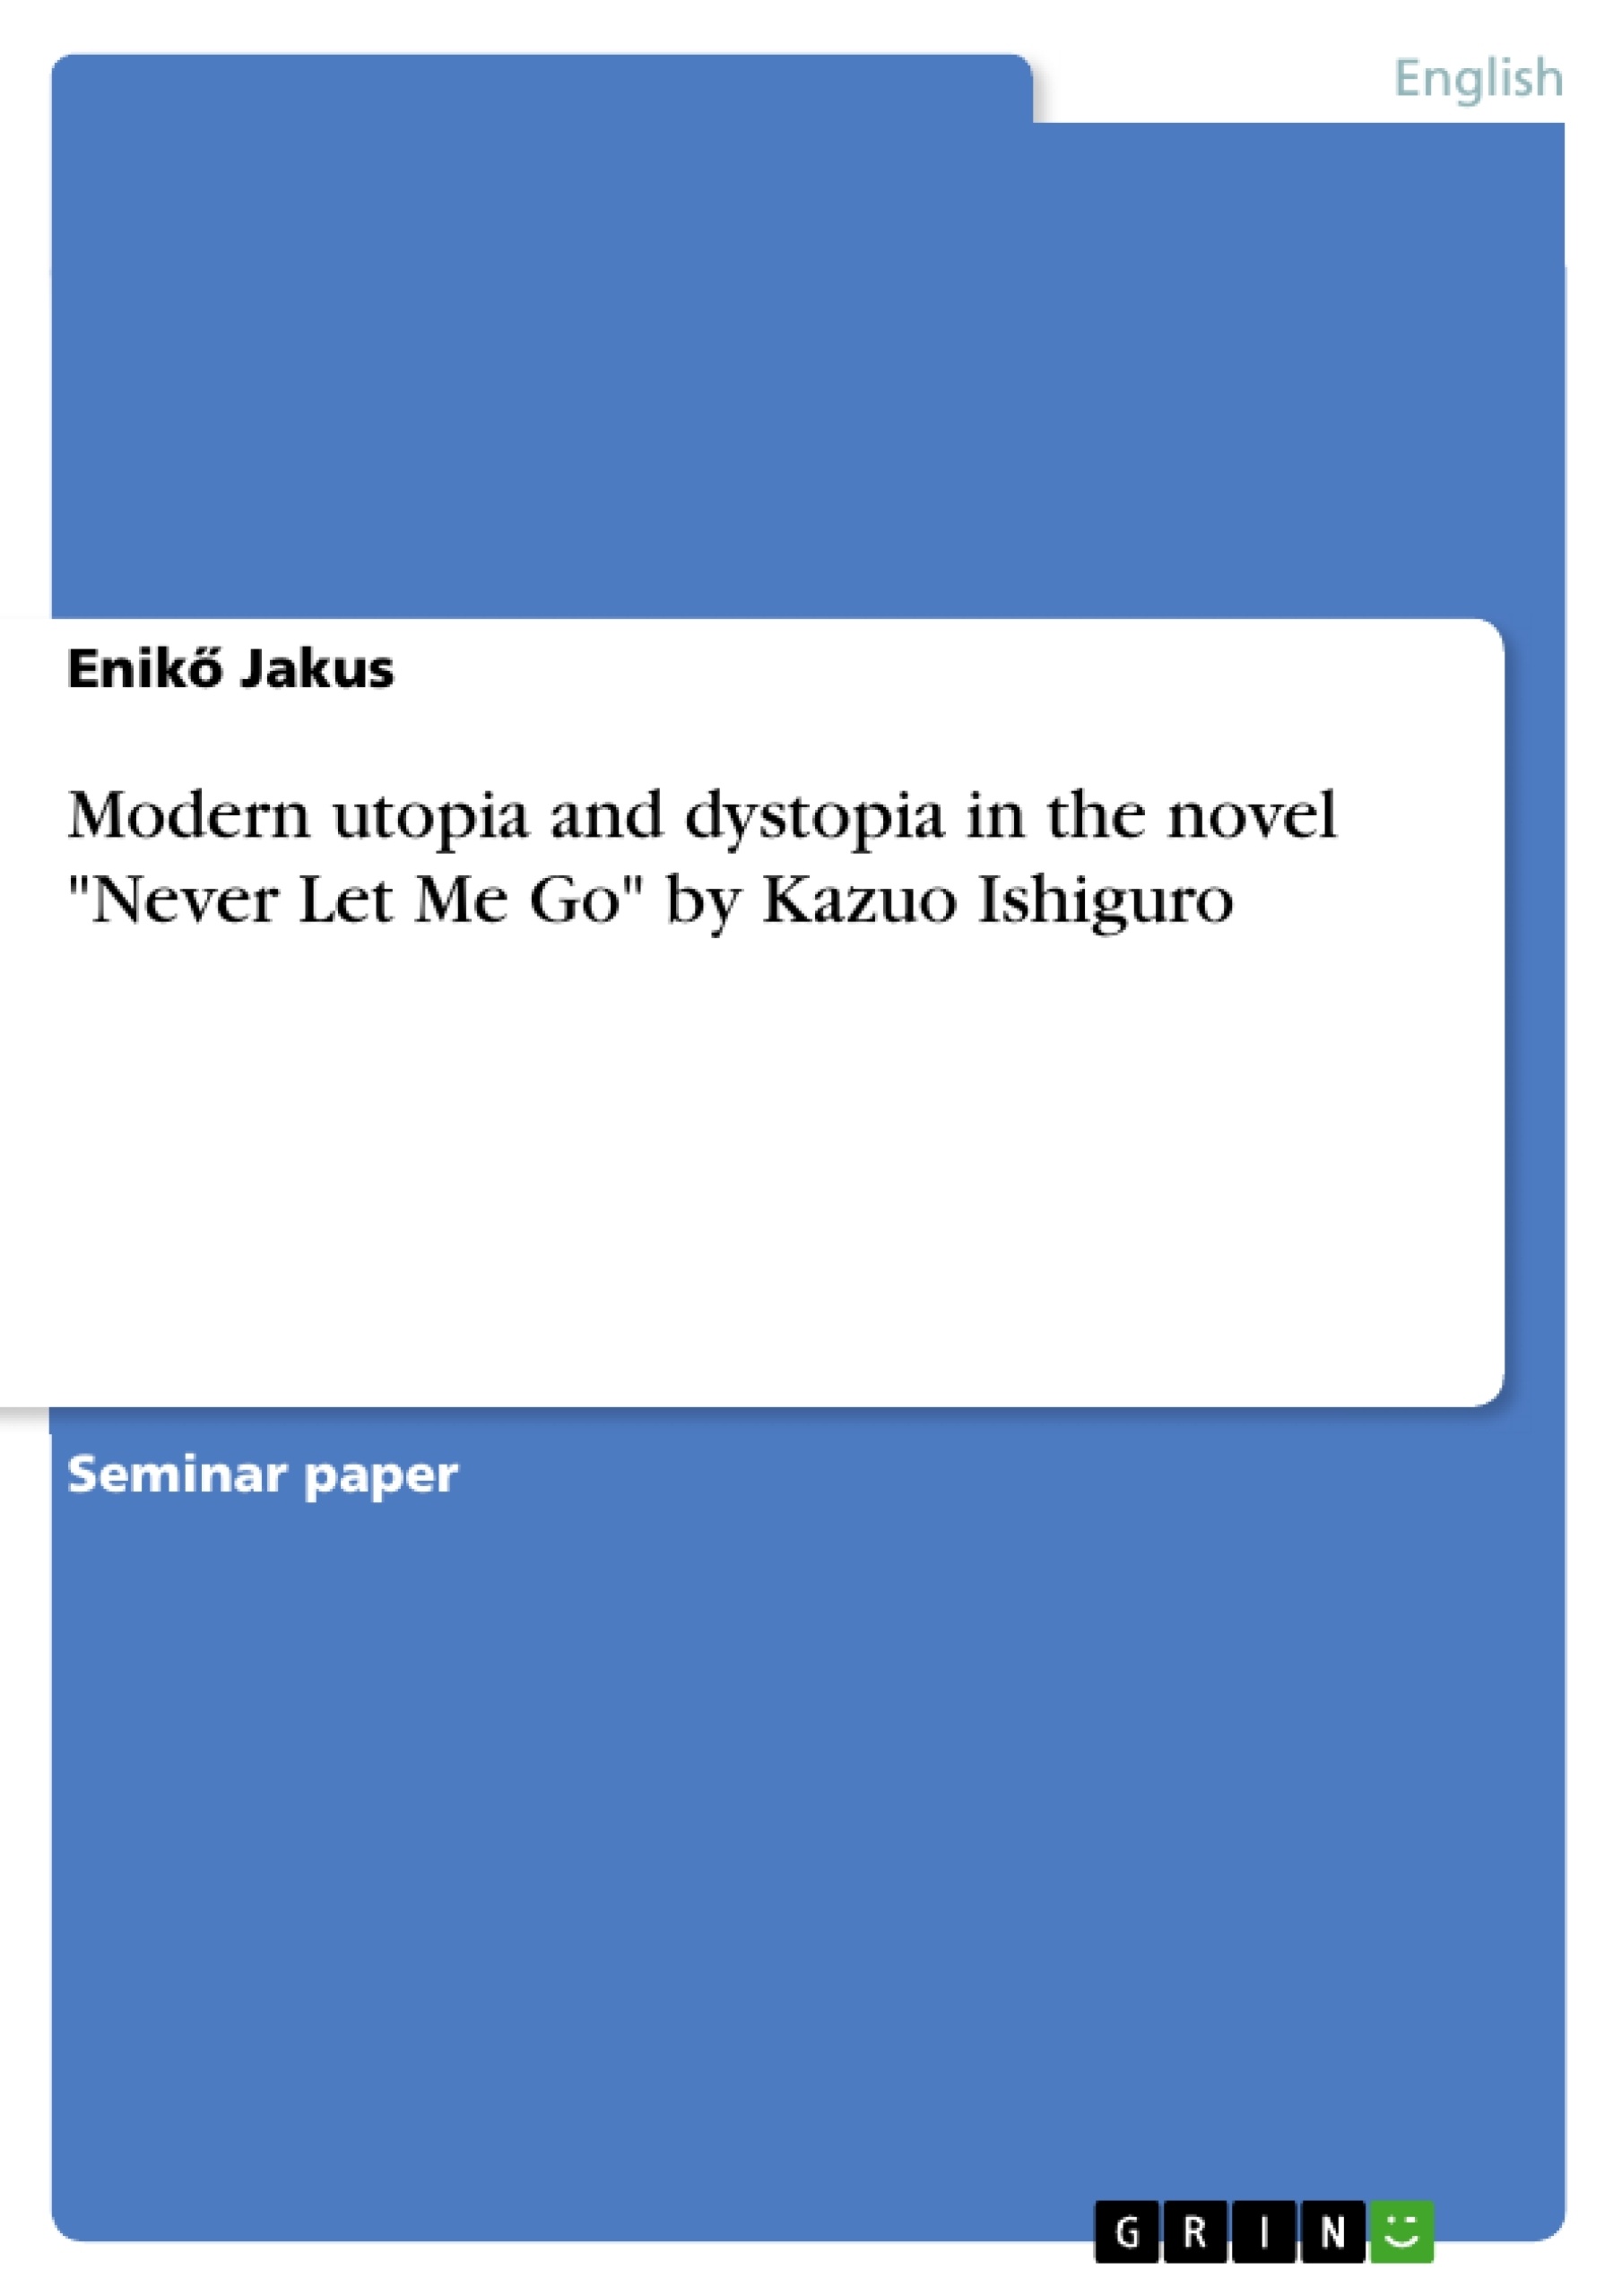 Title: Modern utopia and dystopia in the novel "Never Let Me Go" by Kazuo Ishiguro